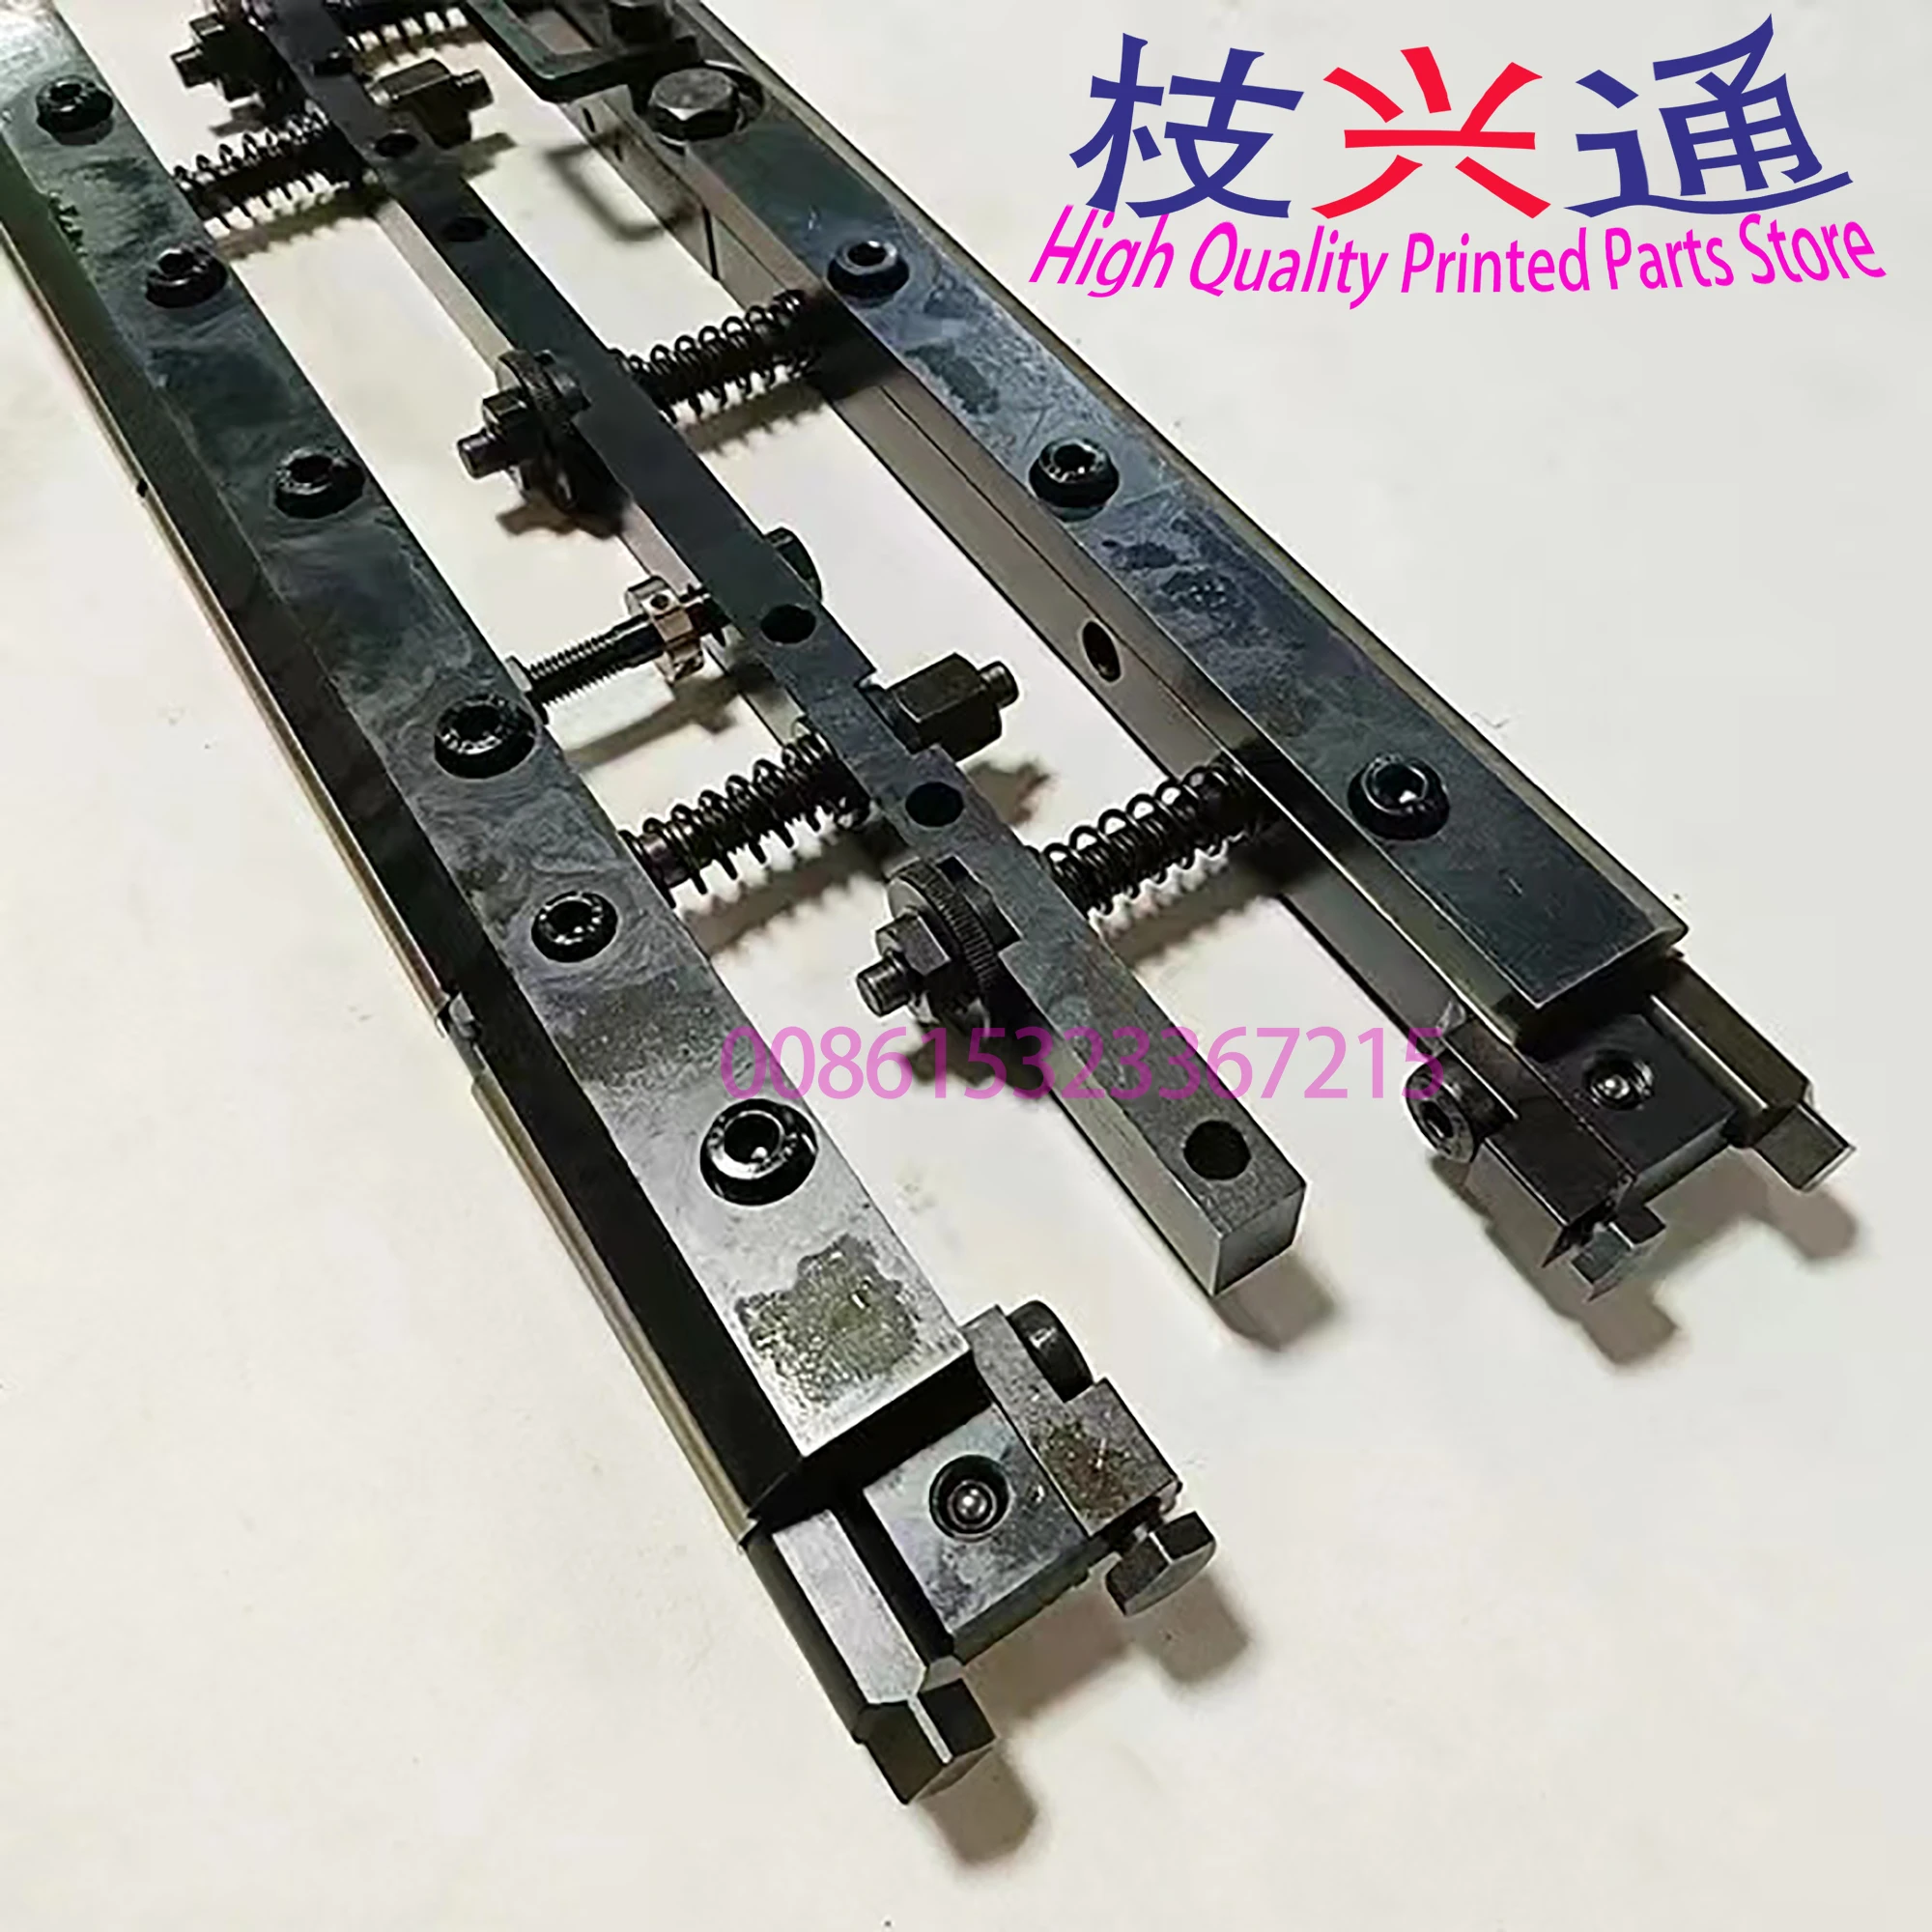 

Free shipping 43.007.200 MO Printing Machine Quick Action Plate Clamp